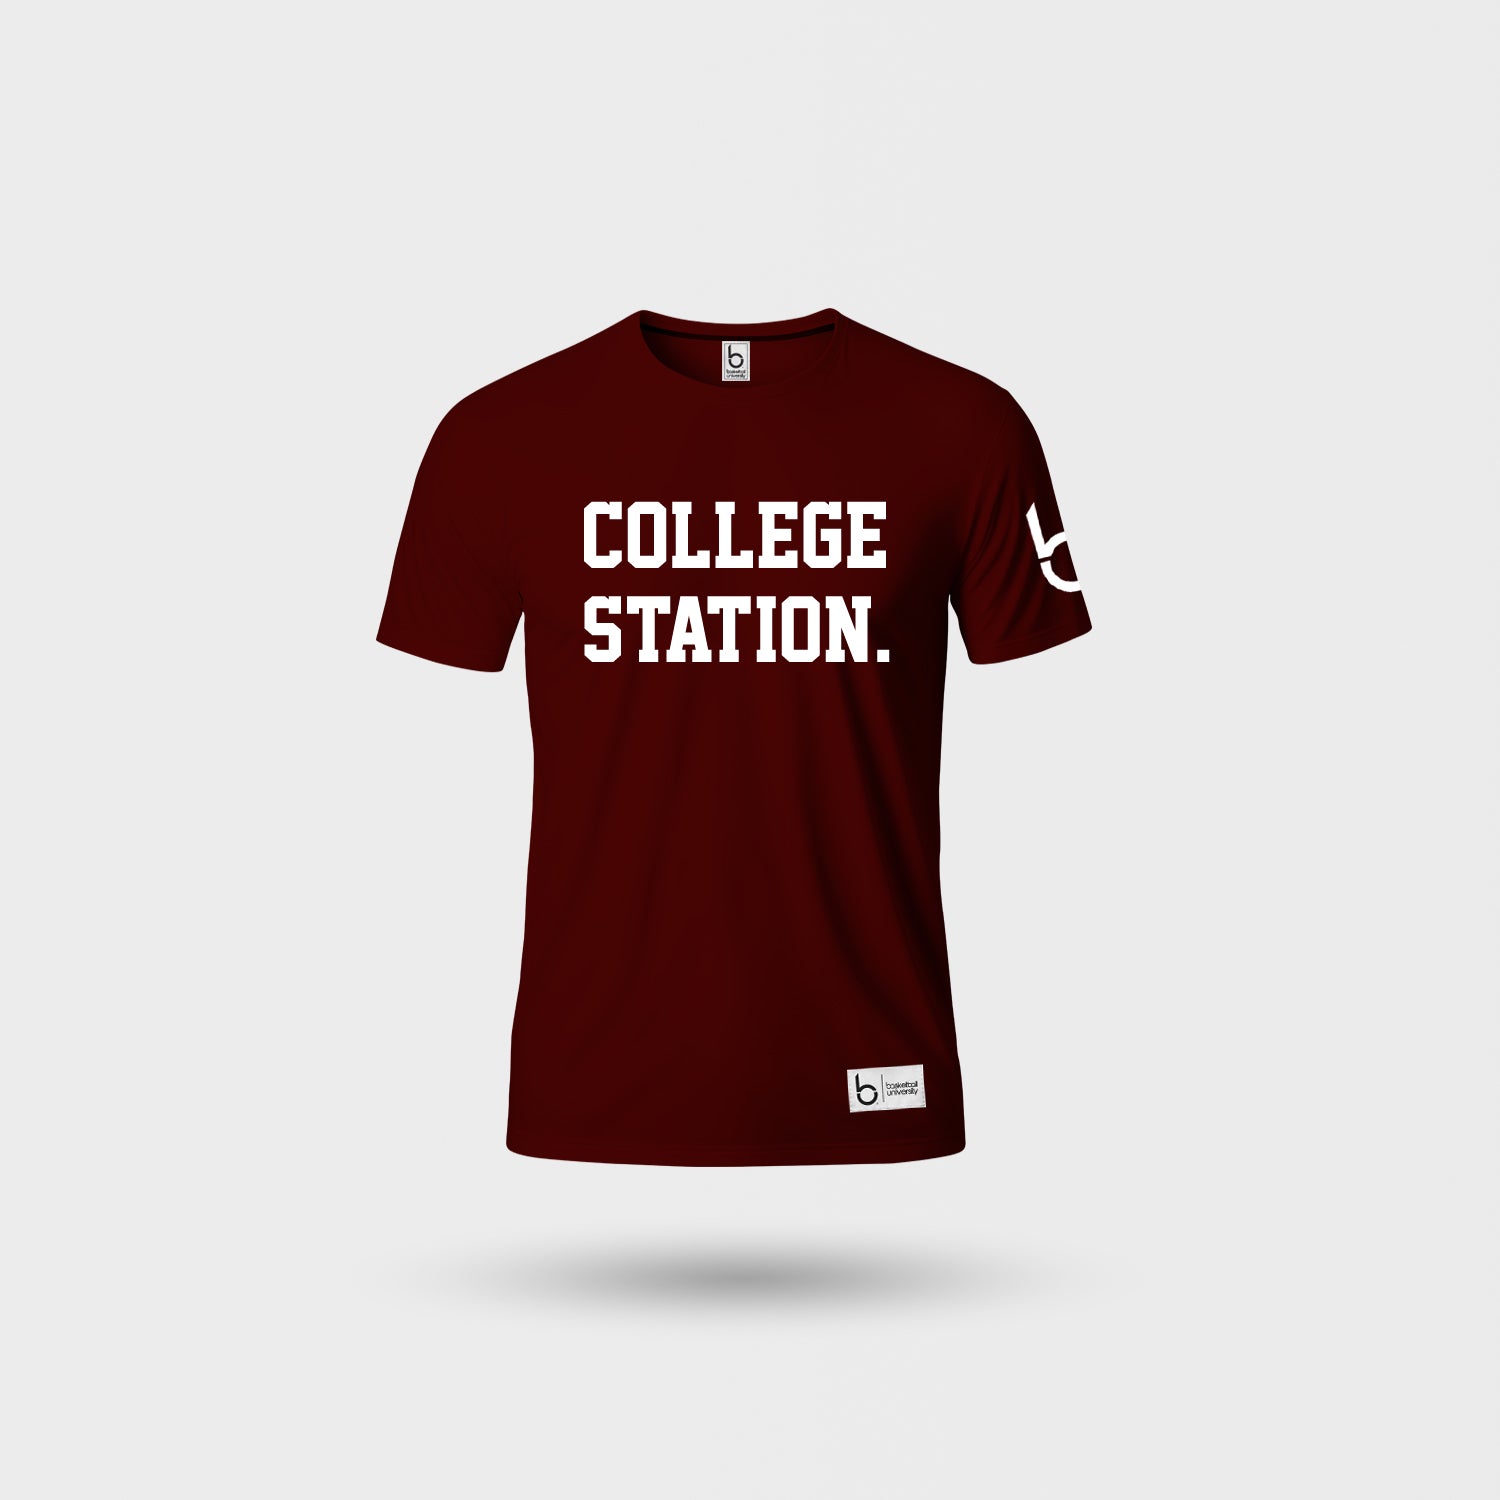 College Station - Hoop City T-Shirt